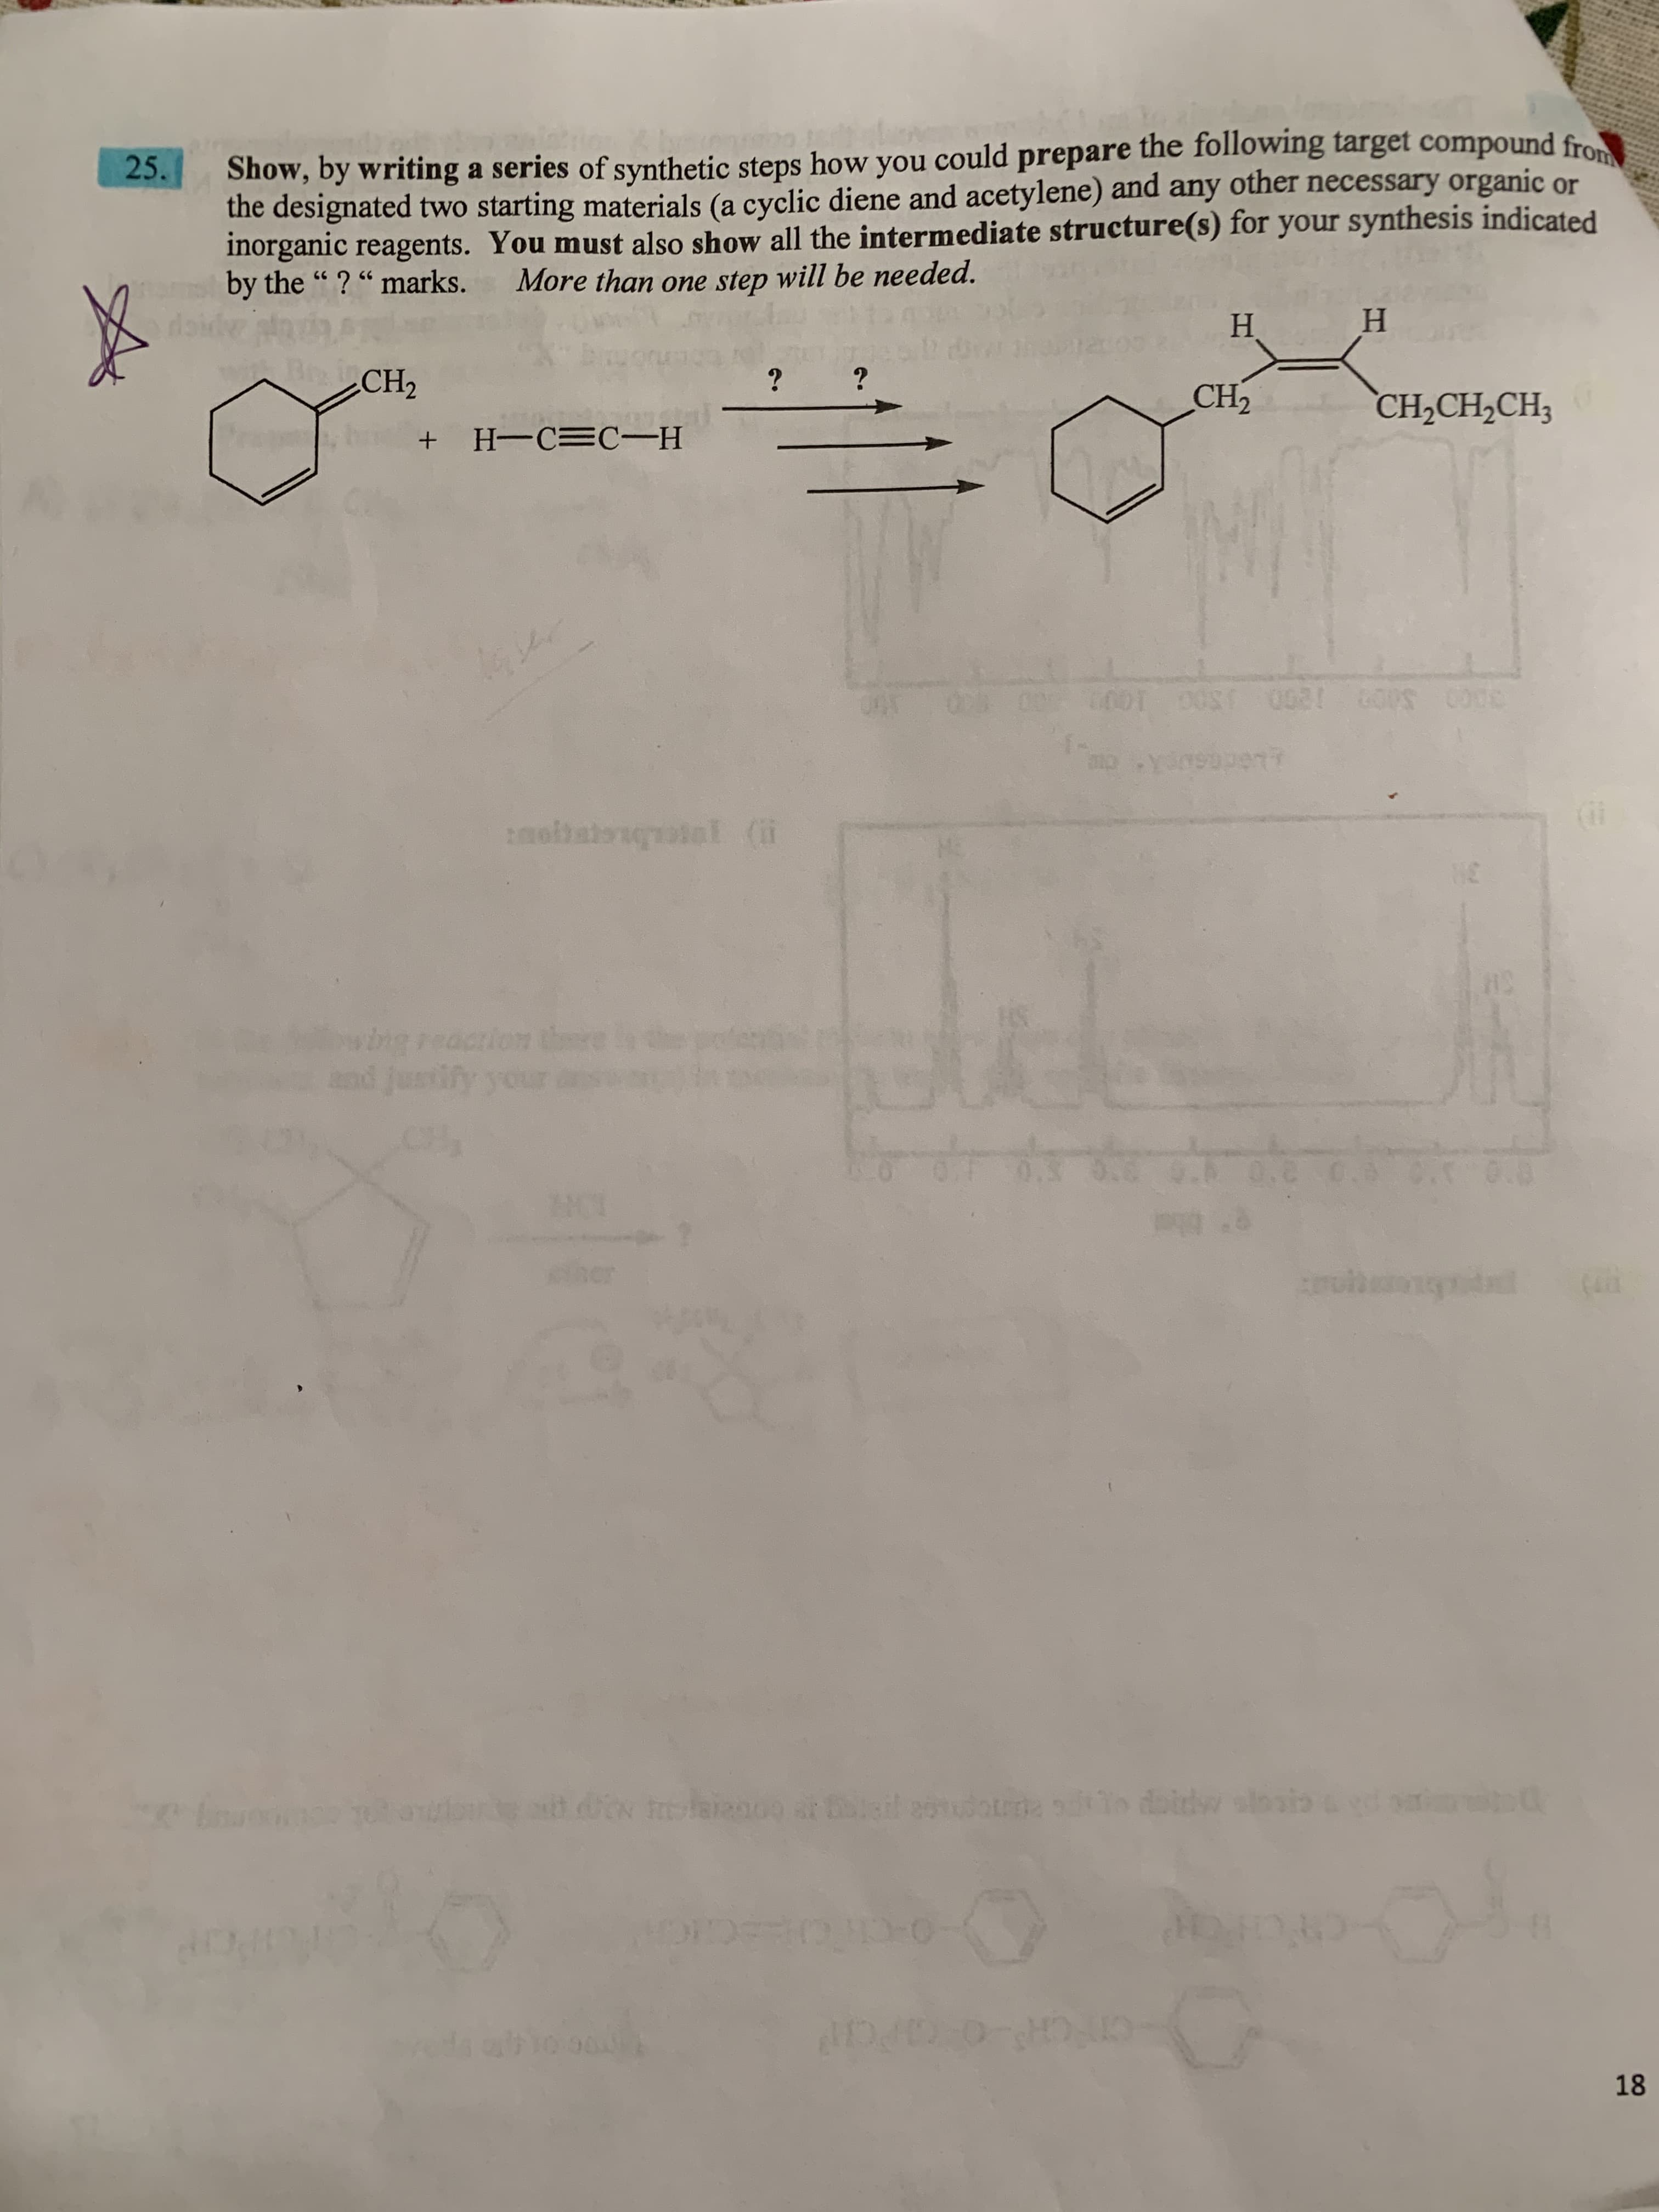 Tahrion
Show, by writing a series of synthetic steps how you could prepare the following target compound from
the designated two starting materials (a cyclic diene and acetylene) and any other necessary organic or
inorganic reagents. You must also show all the intermediate structure(s) for your synthesis indicated
by the "? "marks.
25.
More than one step will be needed.
H.
Н
BrCH2
?
CH2
CH,CH,CH3
H-C=C-H
molhaionotal (i
wing reacrion thre
nd justify your
aoad.io tlainoo ar il eonudotma io doidw slosi:
CTCH O CH
18
